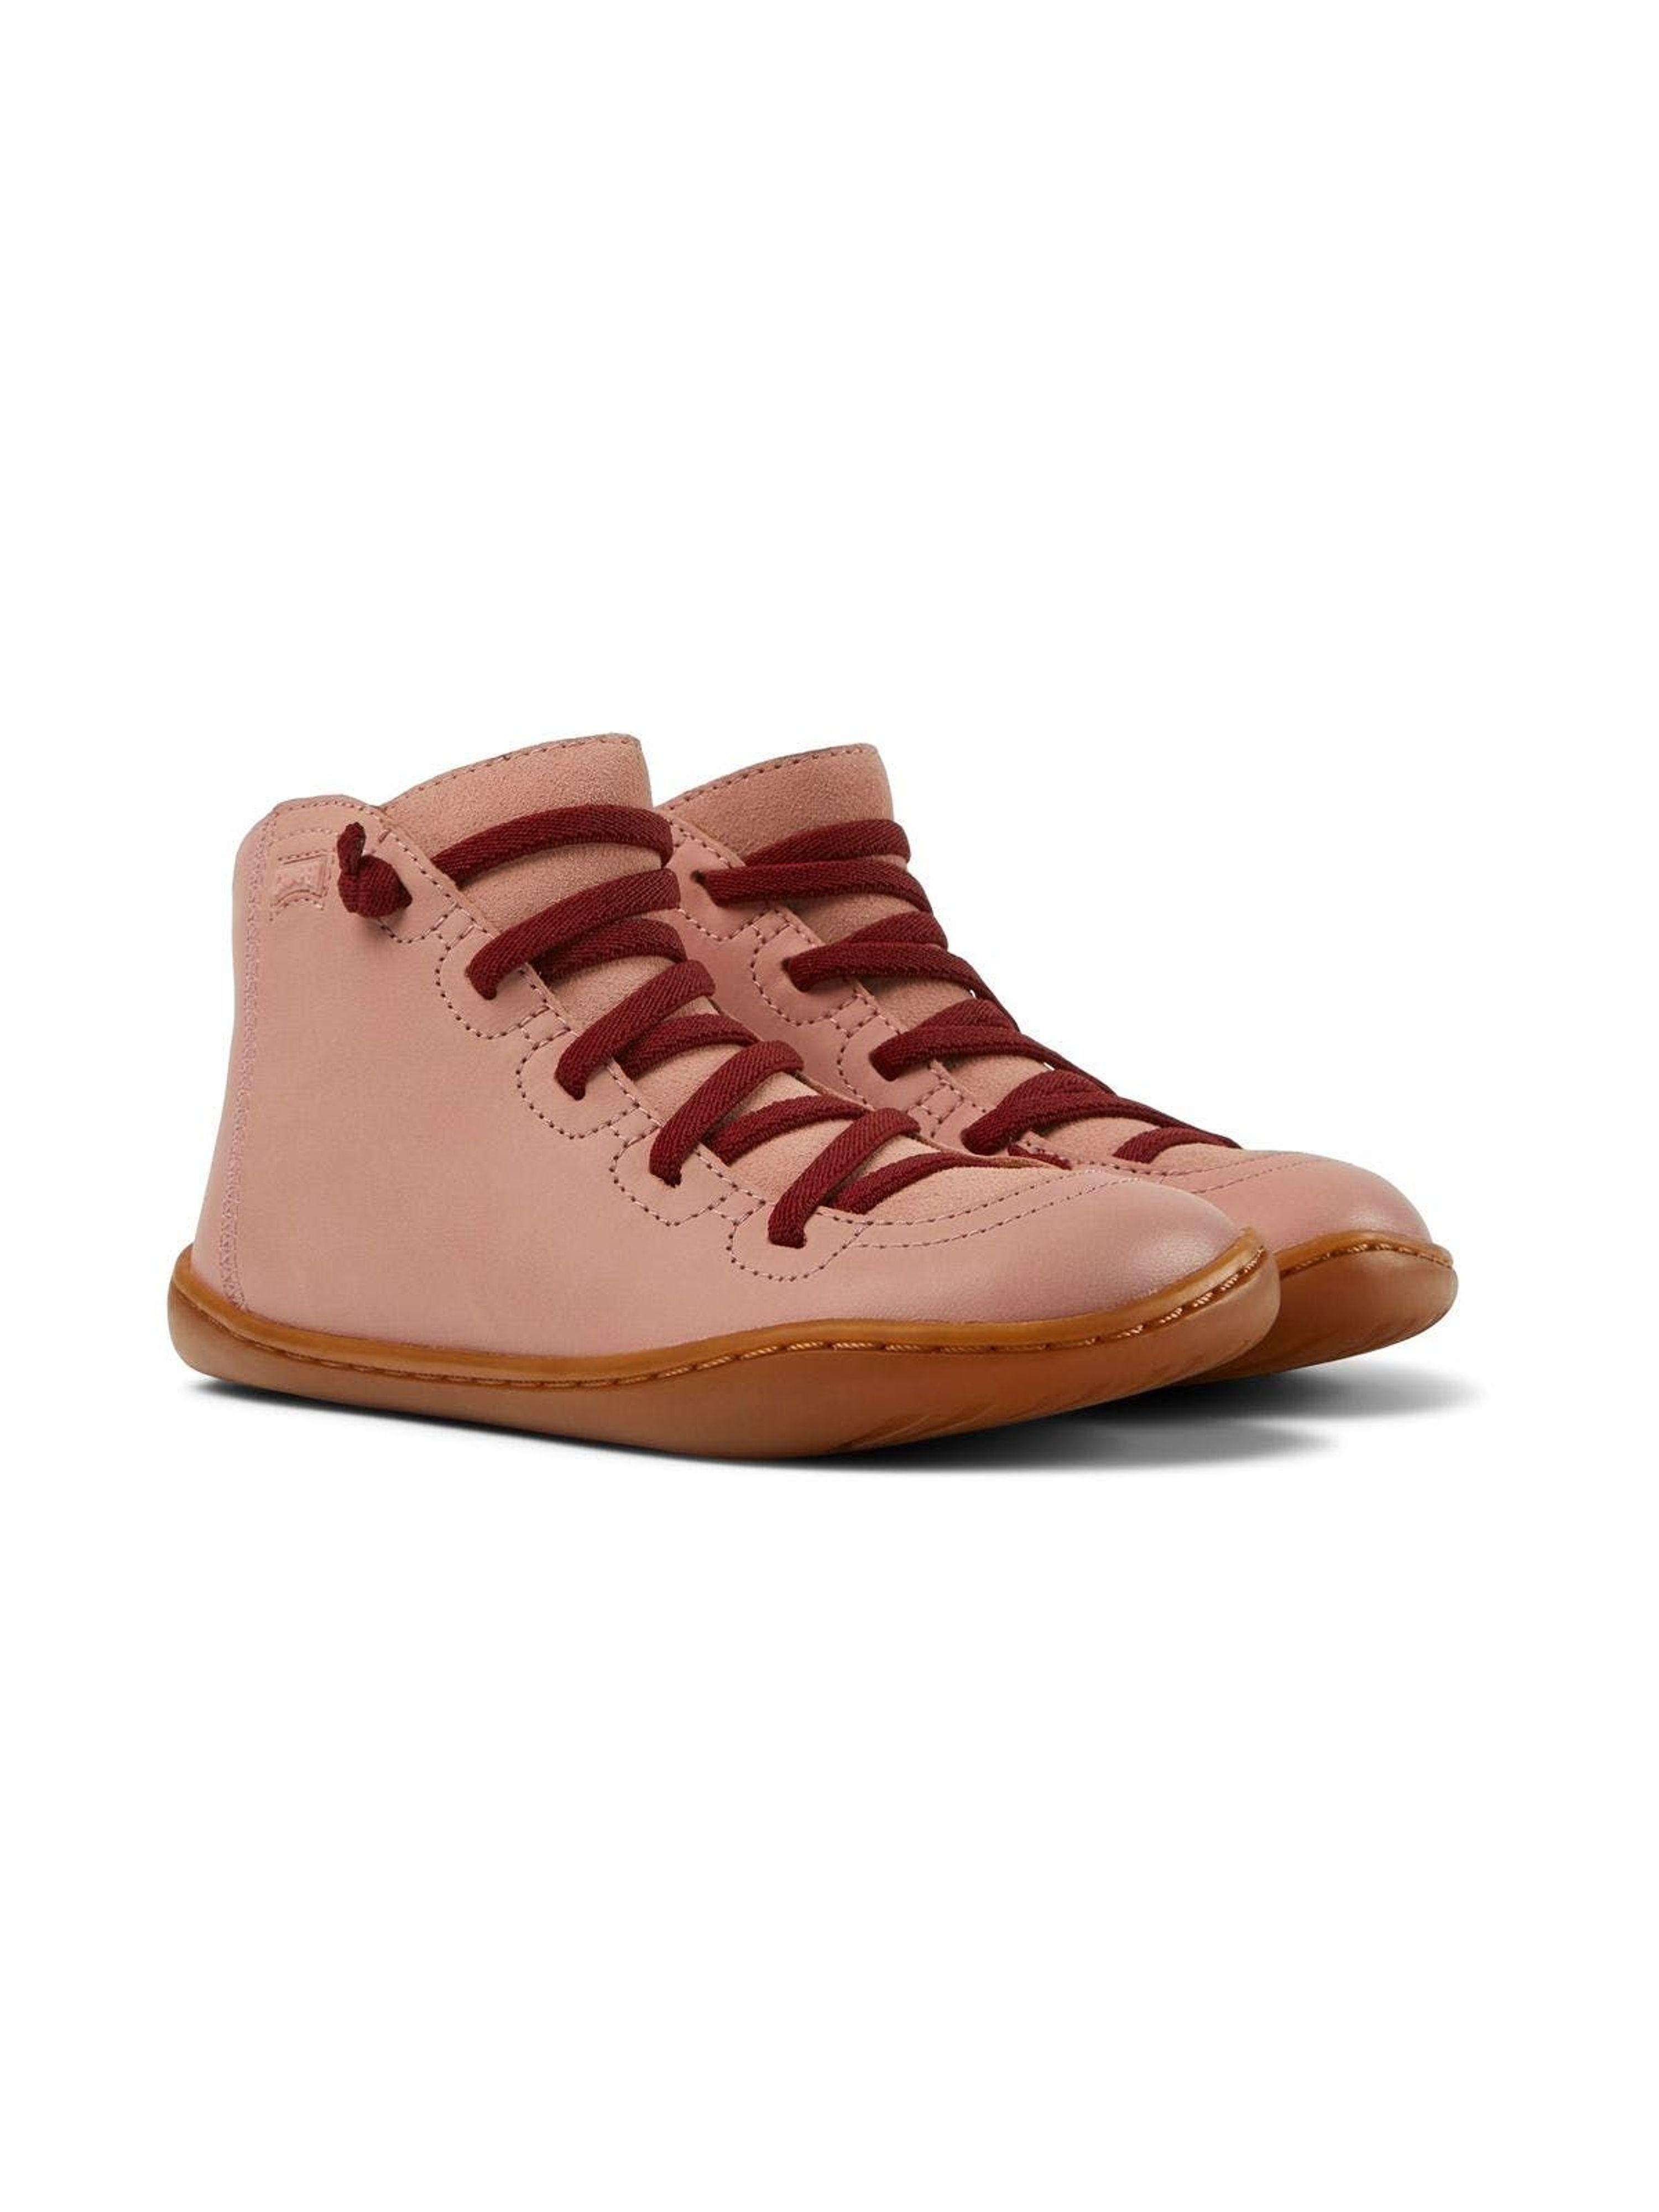 Camper Peu Ankle Boots in Red | Lyst